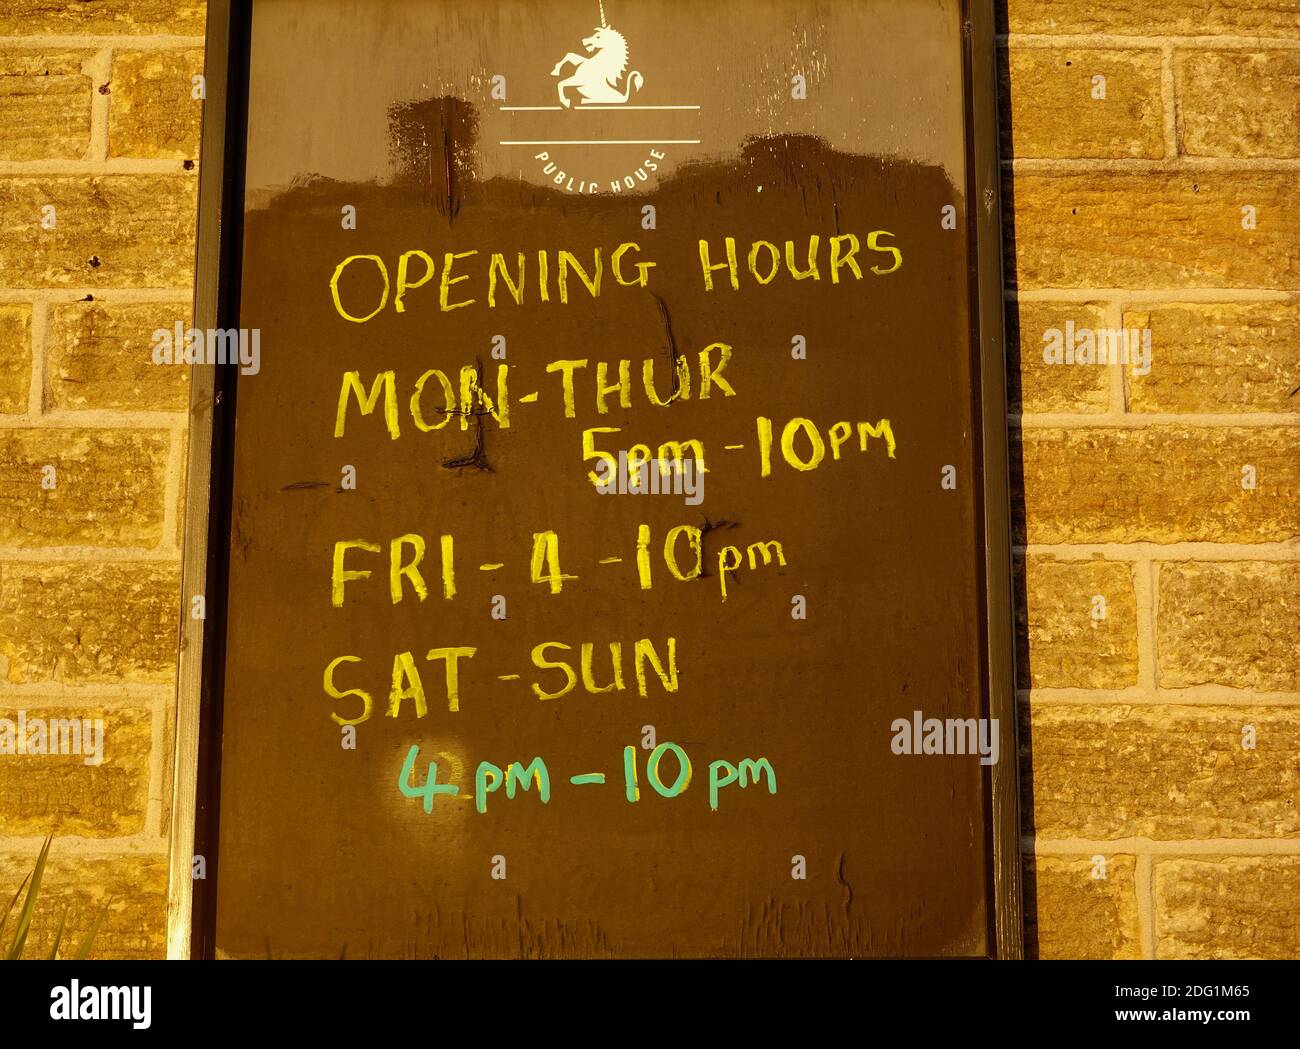 Reduced opening hours at the Hare and Hound pub in New Mills, Derbyshire, due to Covid restrictions. Stock Photo